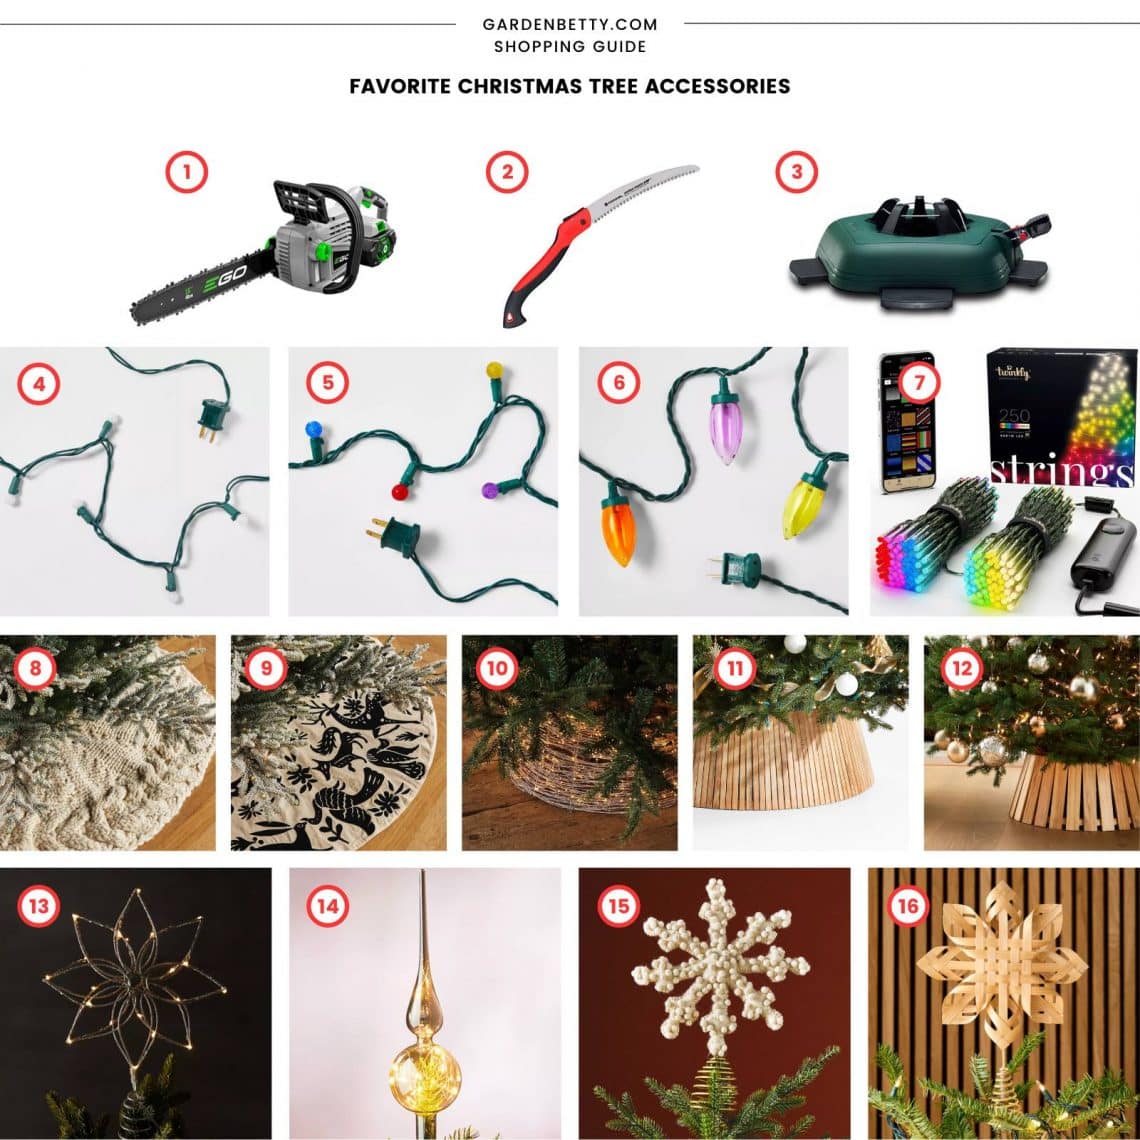 7 Proven Tips and Tricks to Make a Christmas Tree Last Longer – Garden ...